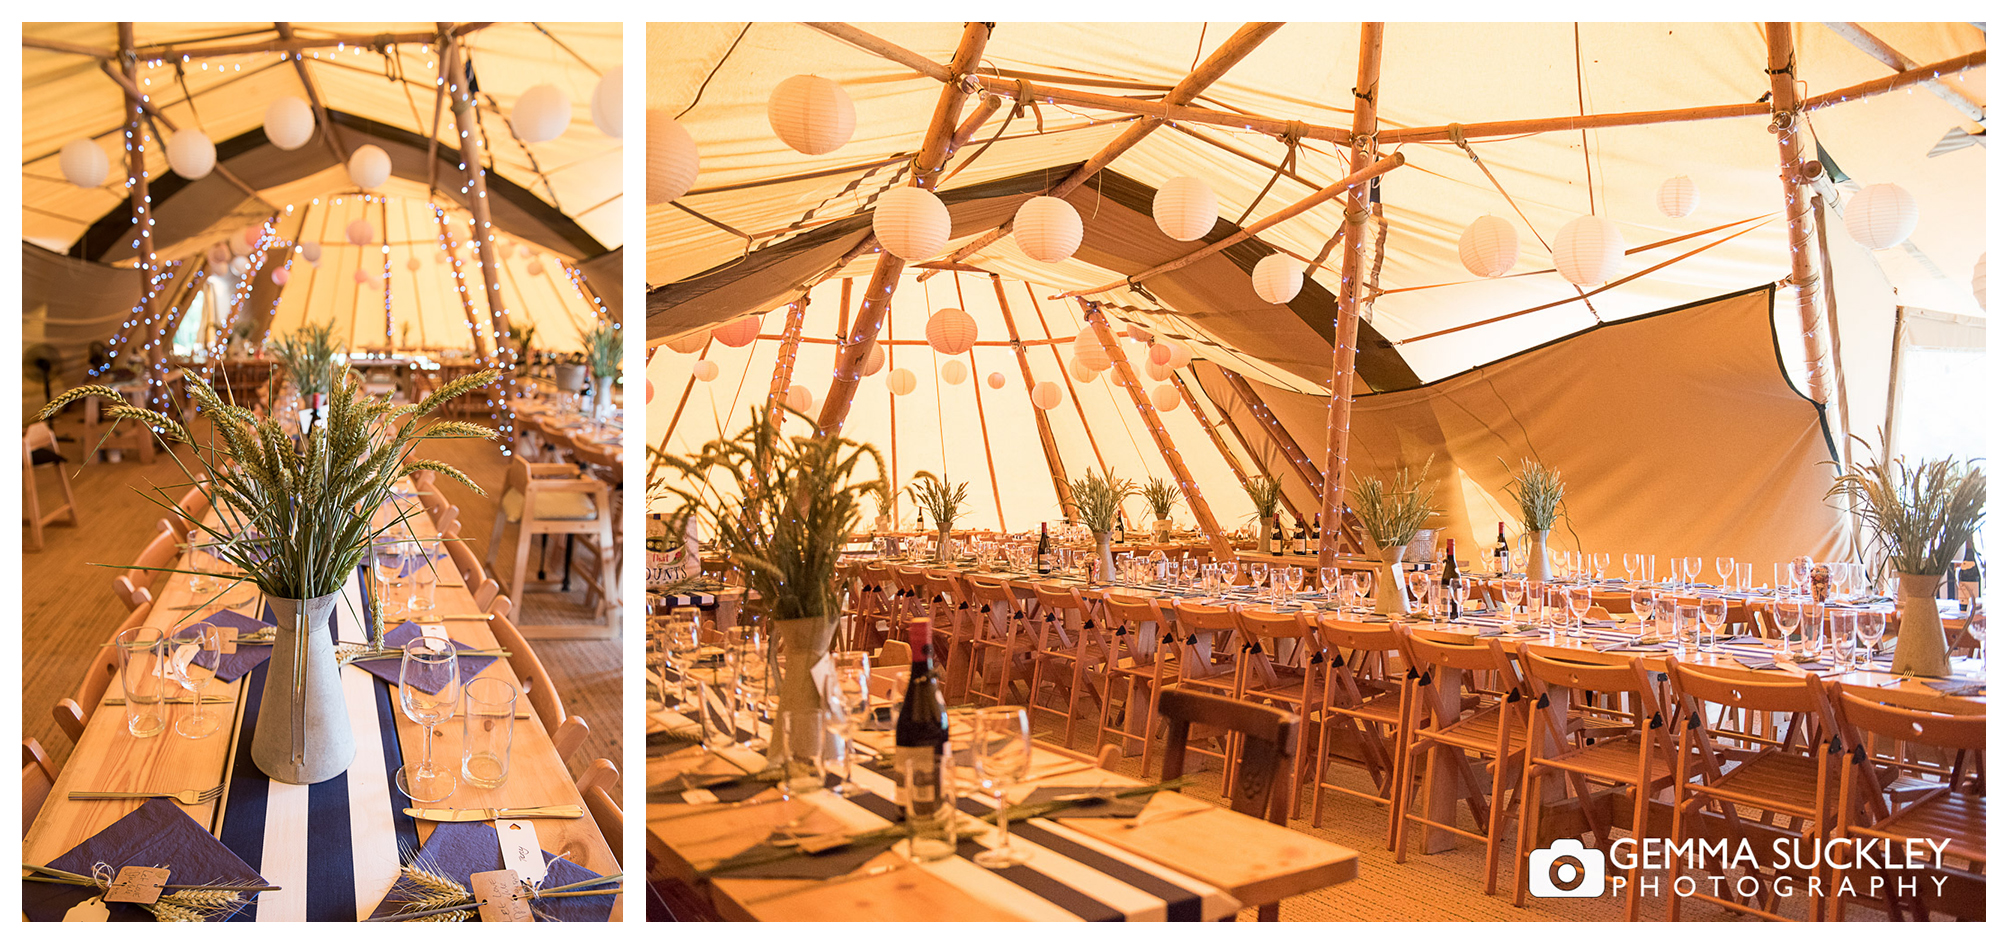 inside of the tipi at Oaklands, east Yorkshire, decorated for a wedding